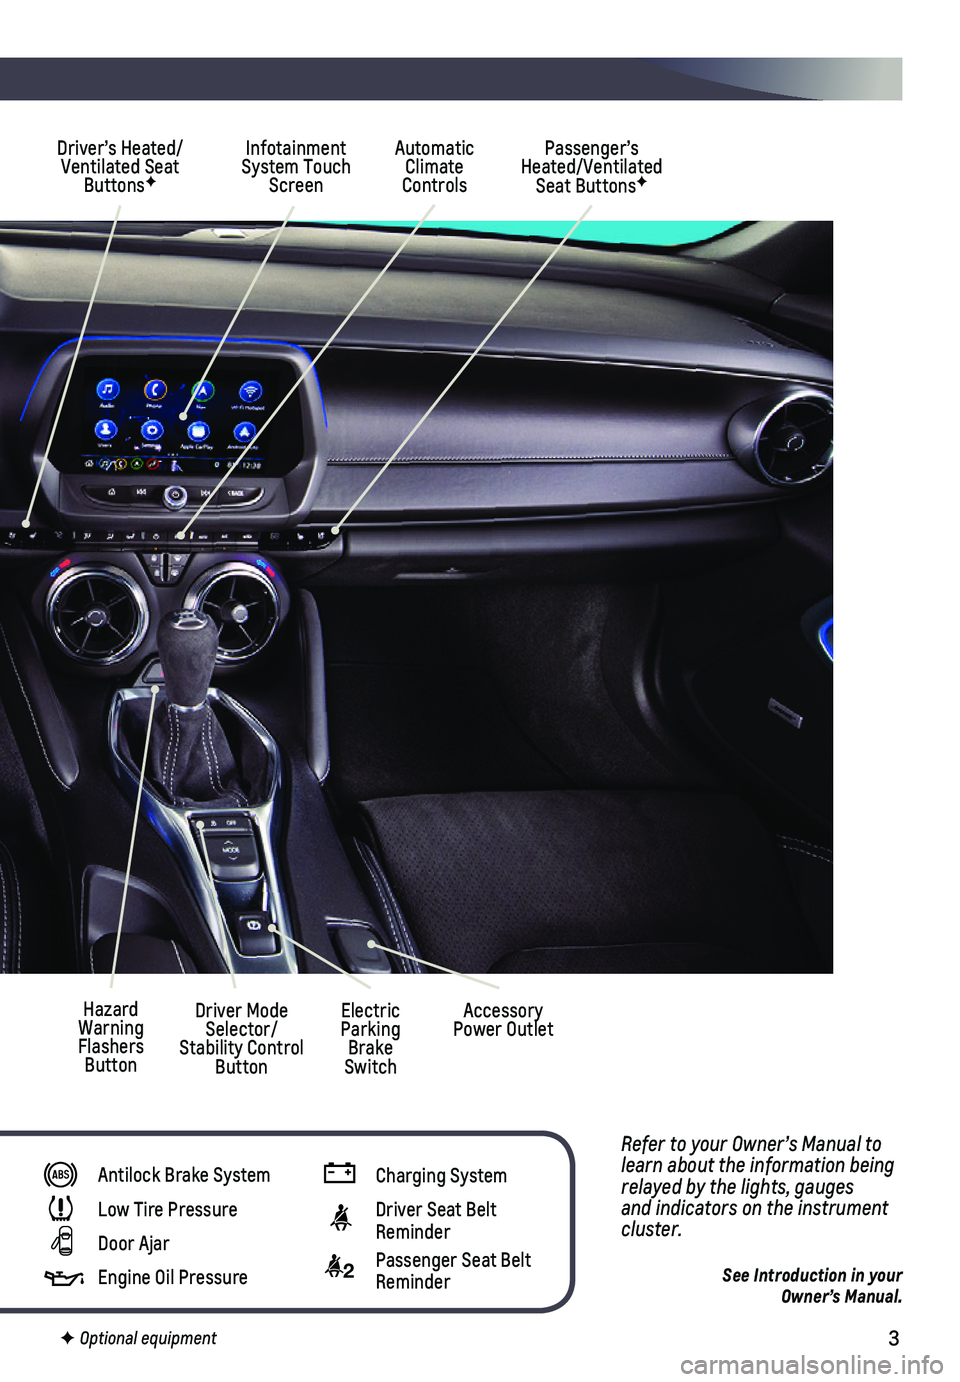 CHEVROLET CAMARO 2021  Get To Know Guide 3
Refer to your Owner’s Manual to learn about the information being relayed by the lights, gauges and indicators on the instrument cluster.
See Introduction in your  Owner’s Manual.
Driver’s Hea